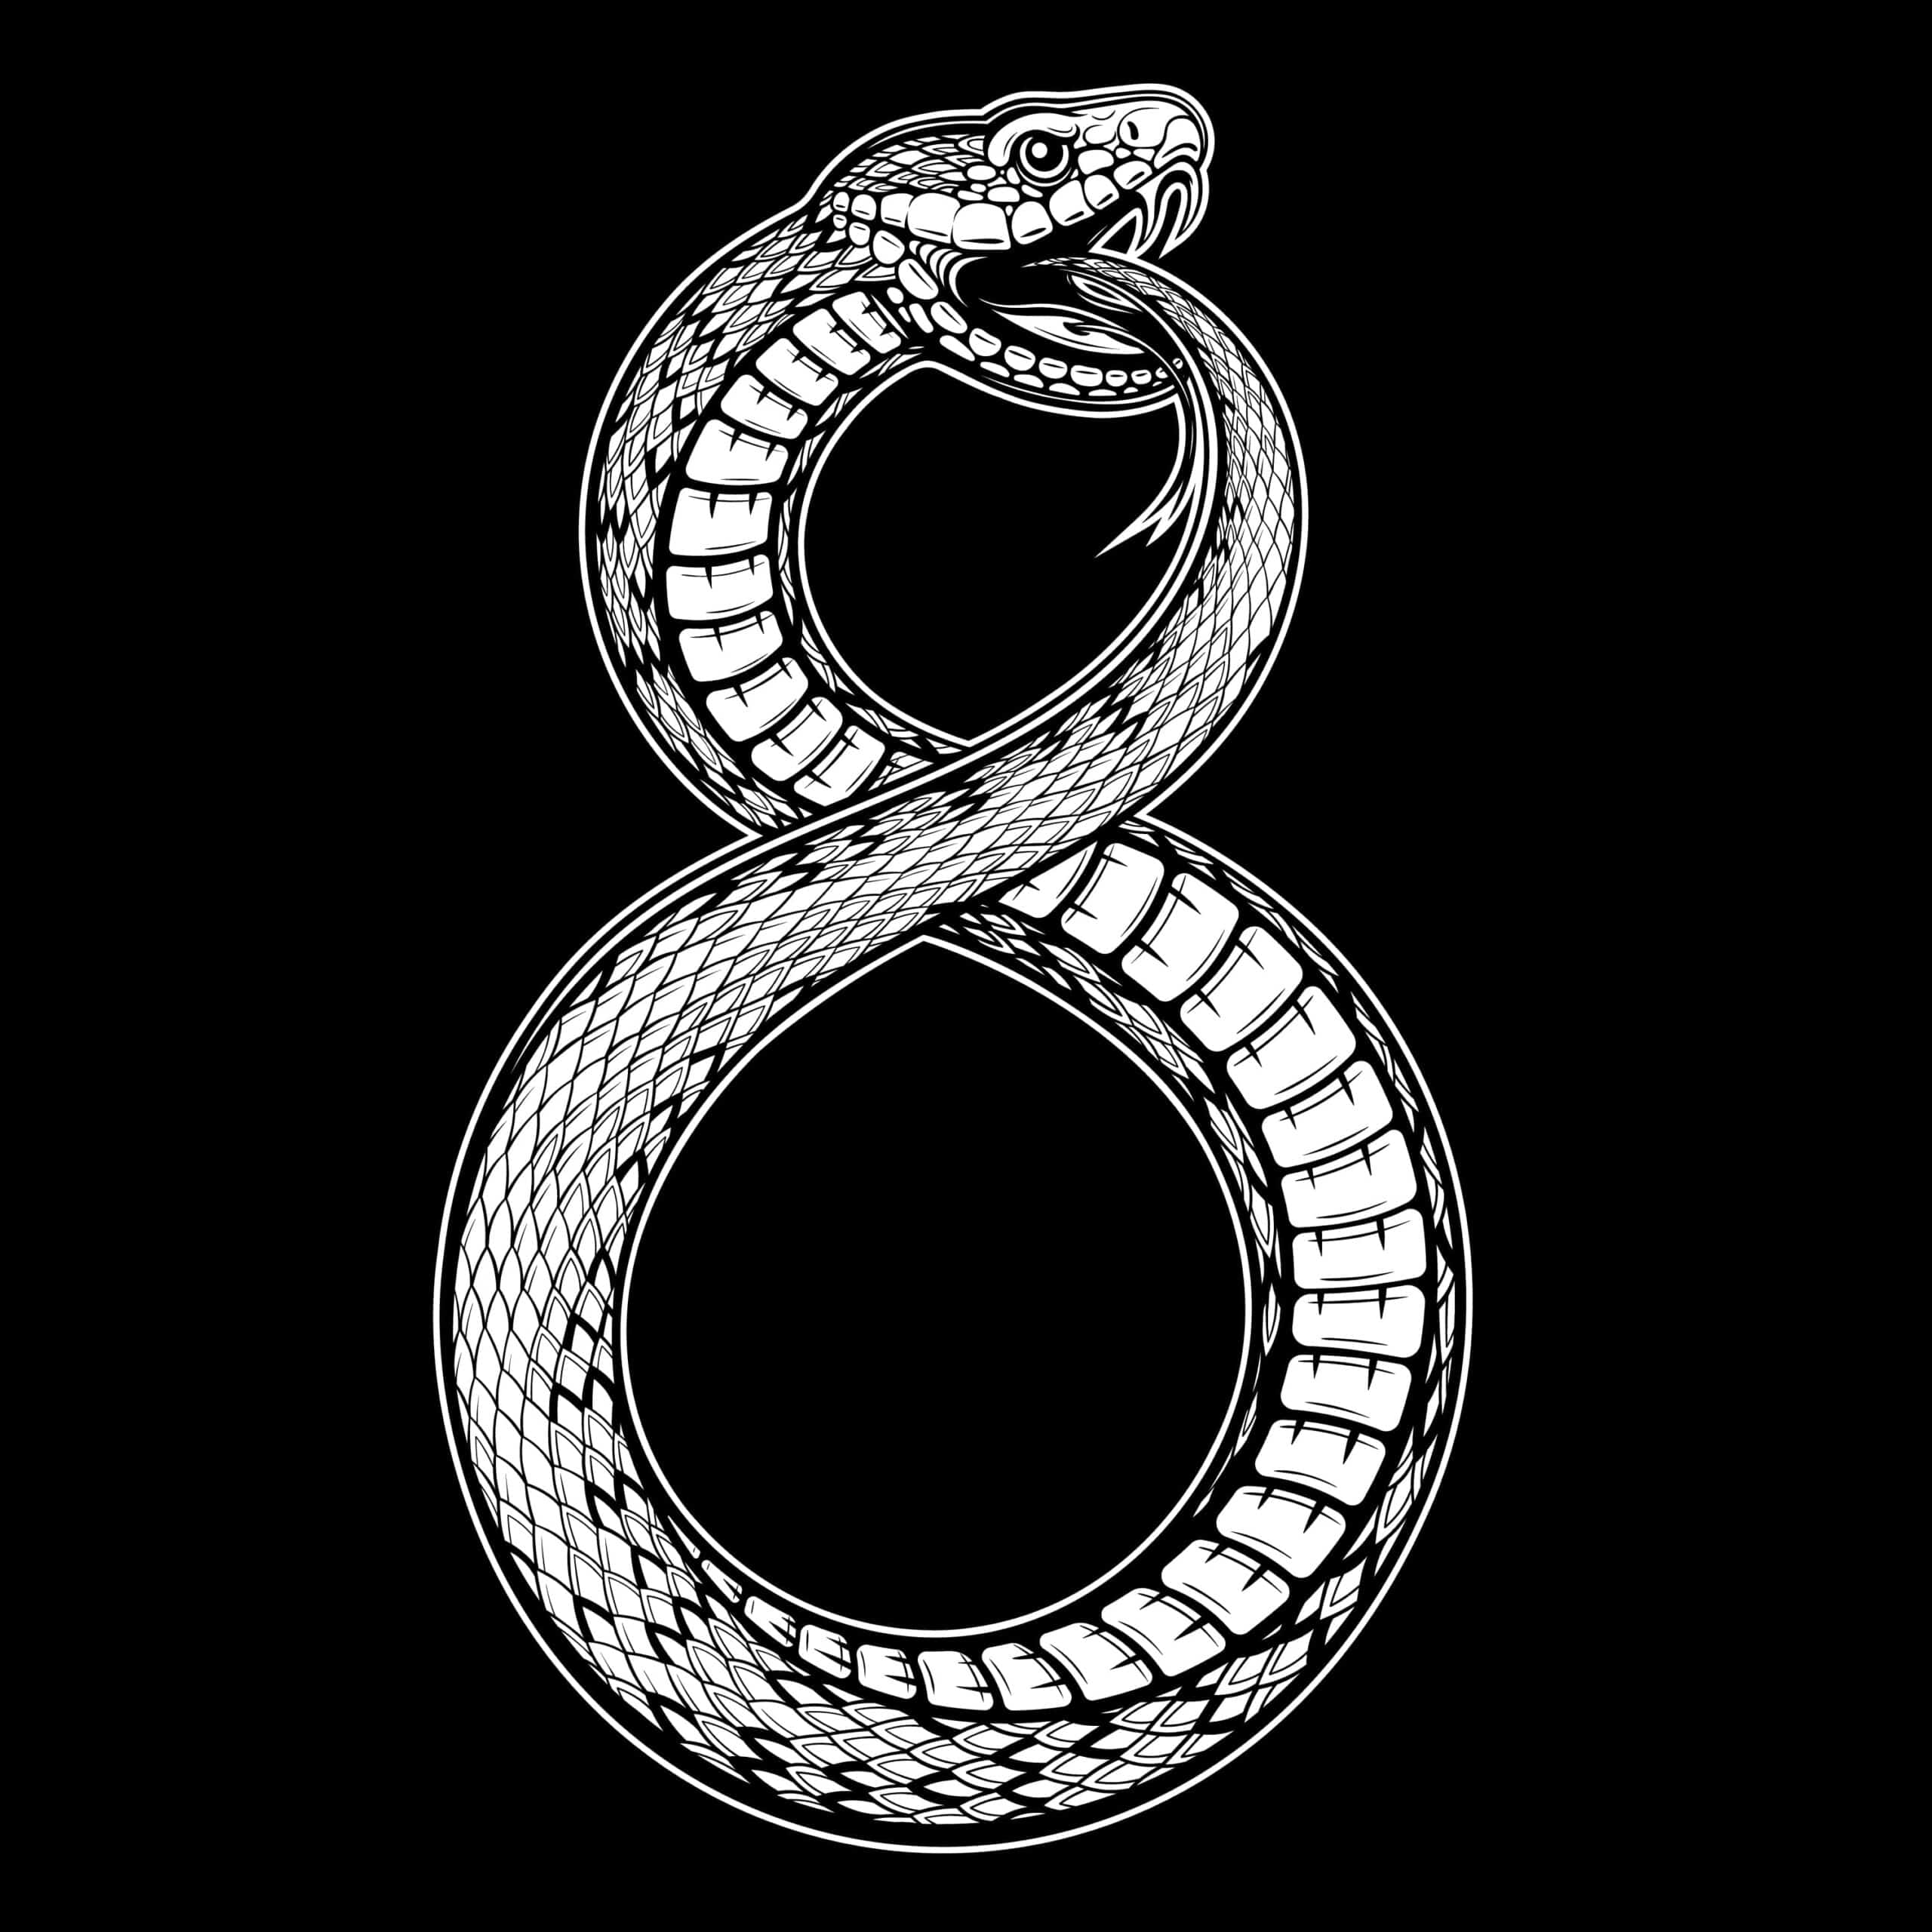 ouroboros and infinity symbol drawing